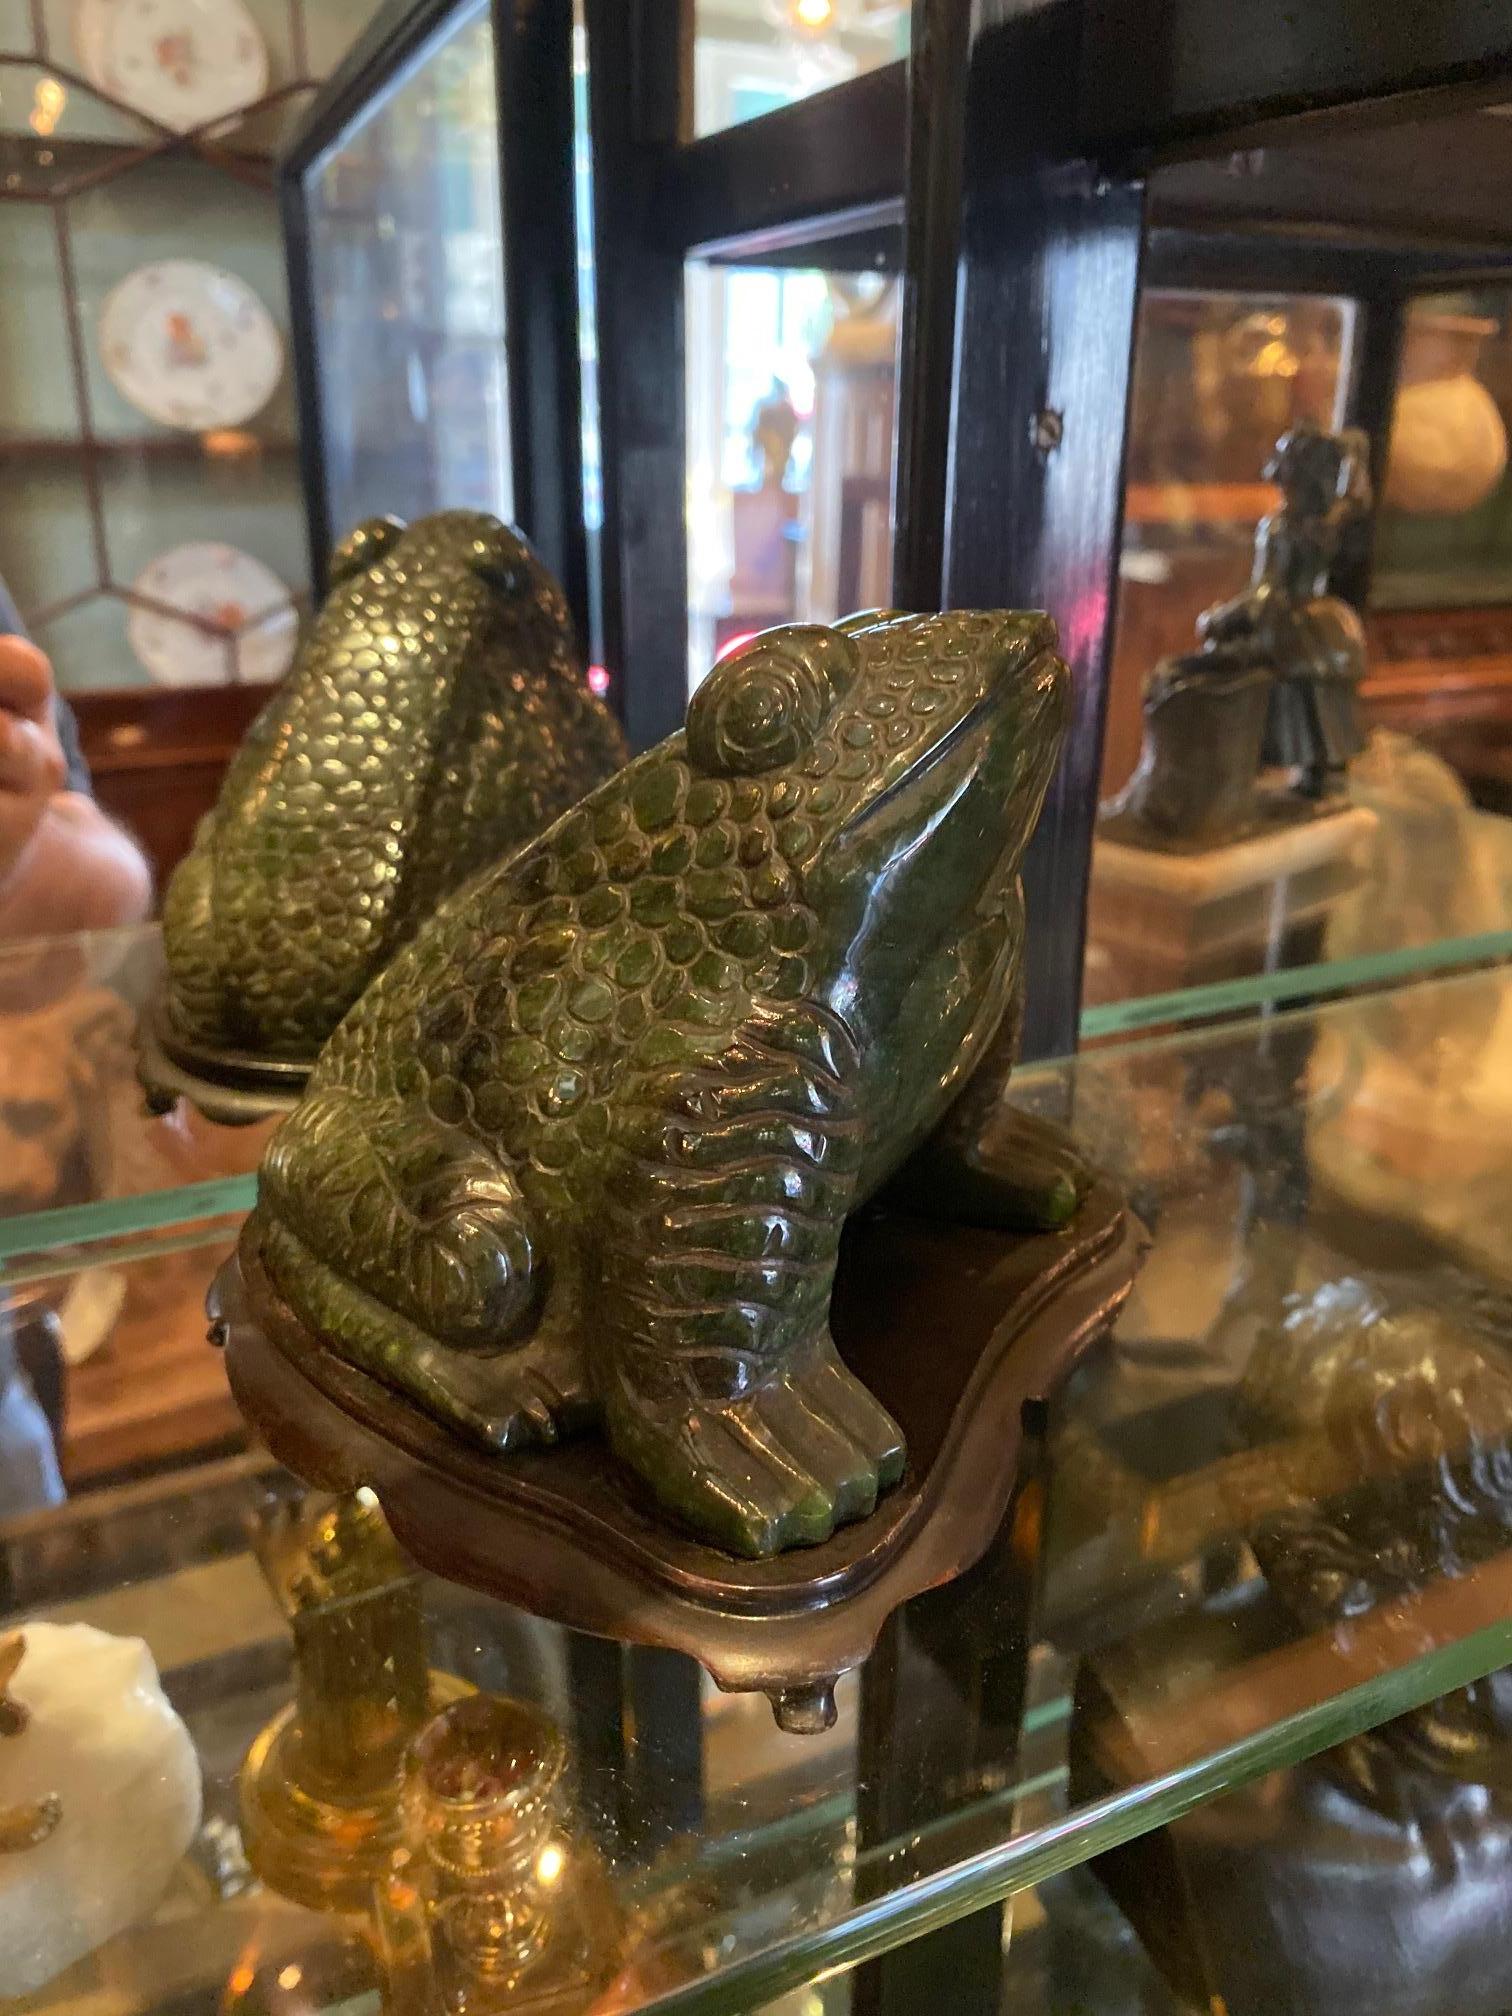 Hand Carved Stone Possible malachite Paperweight office Desk Sculpture object 
A nicely hand carved Hardstone paperweight sculpture frog object decorative antique gift, sitting on a carved wood base
As a special gift item object to add a touch of